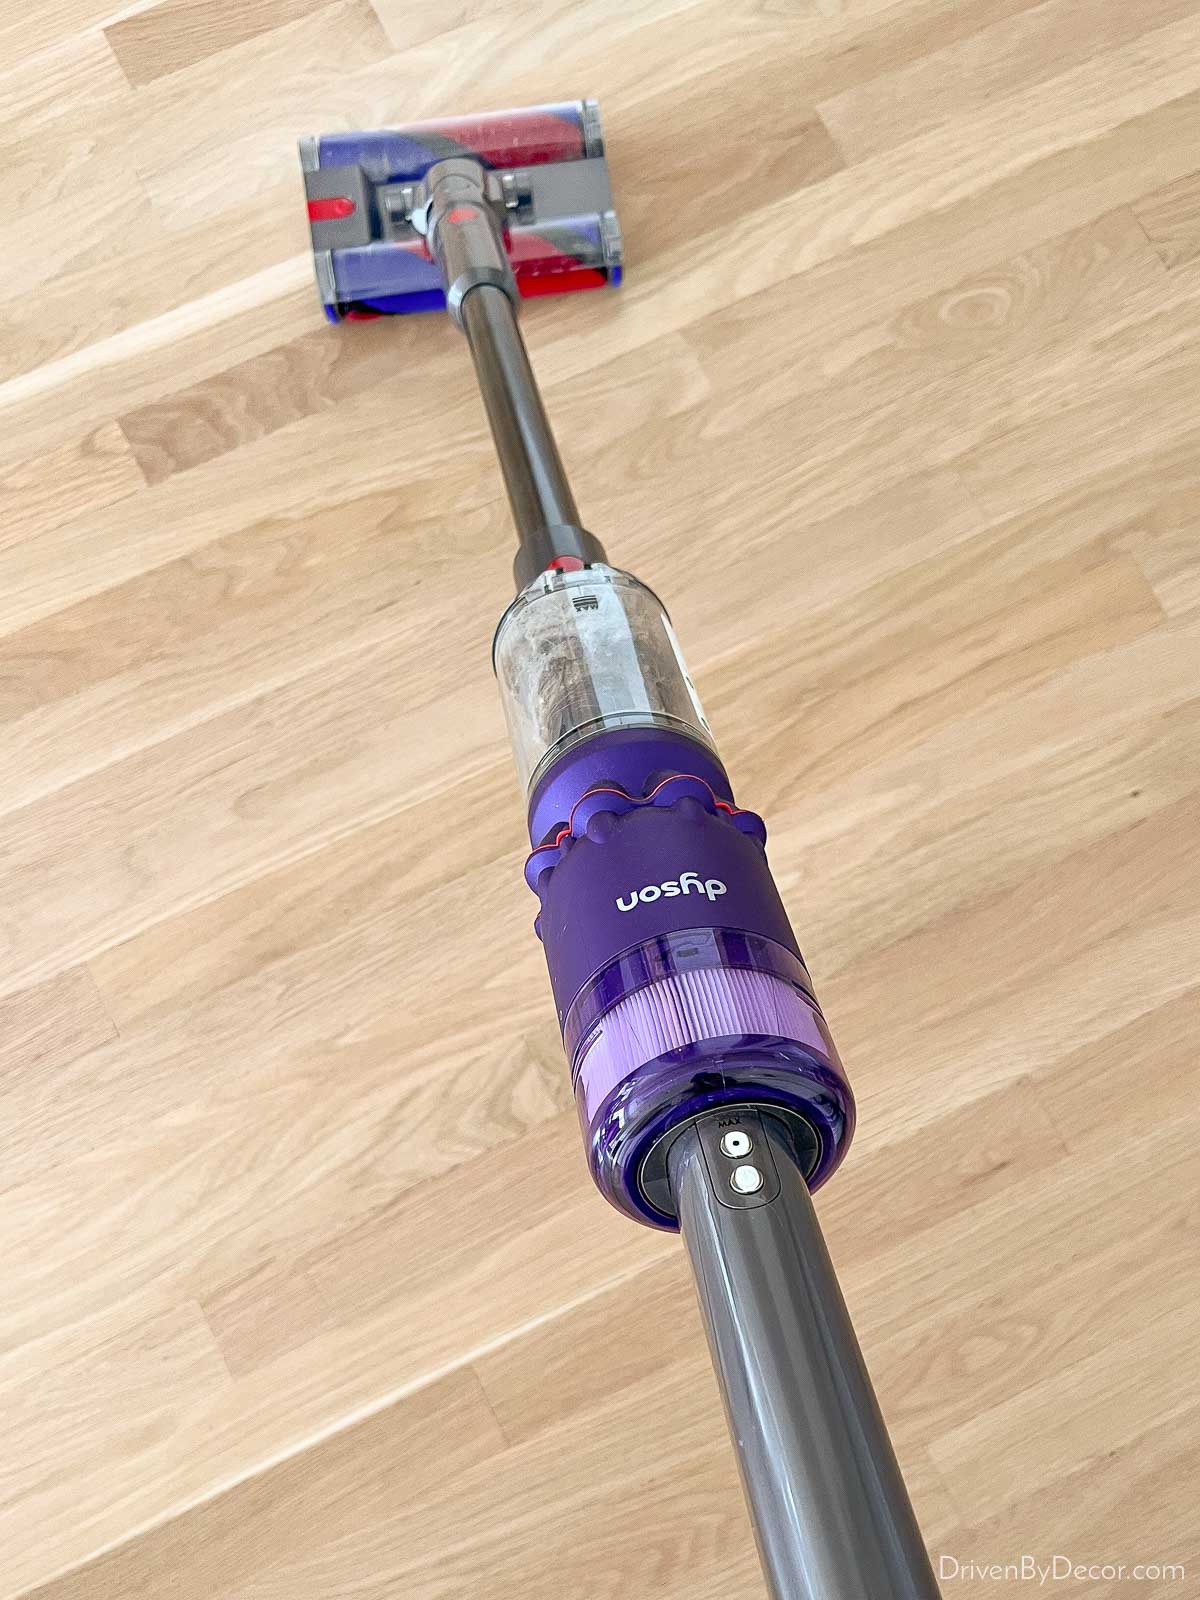 Favorite cleaning tool for vacuuming hardwood floors - Dyson Omni-glide